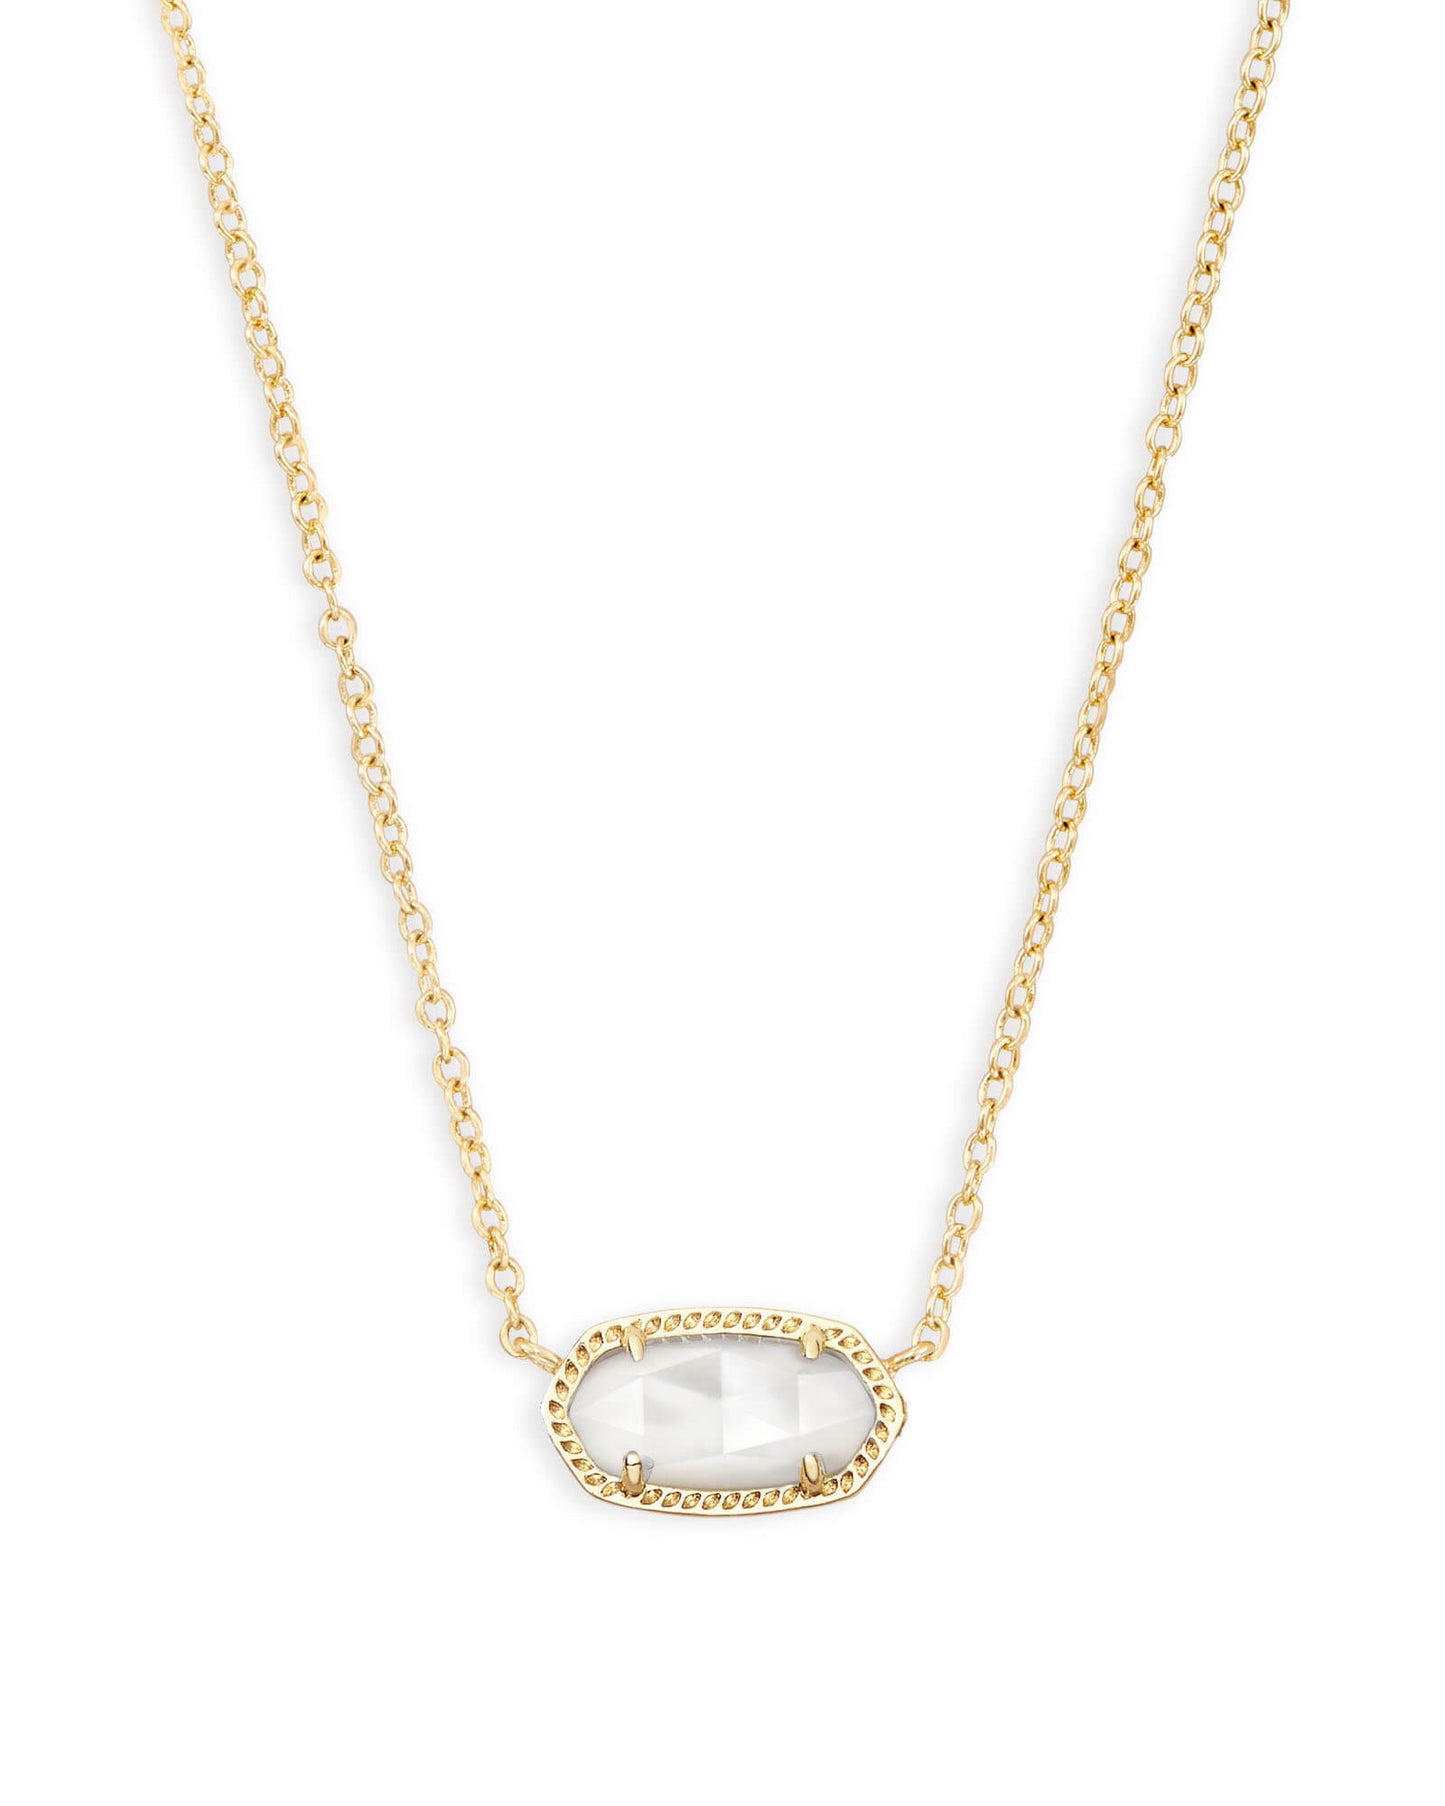 Kendra Scott Elisa Pendant Necklace - Gold Ivory Mother Of Pearl